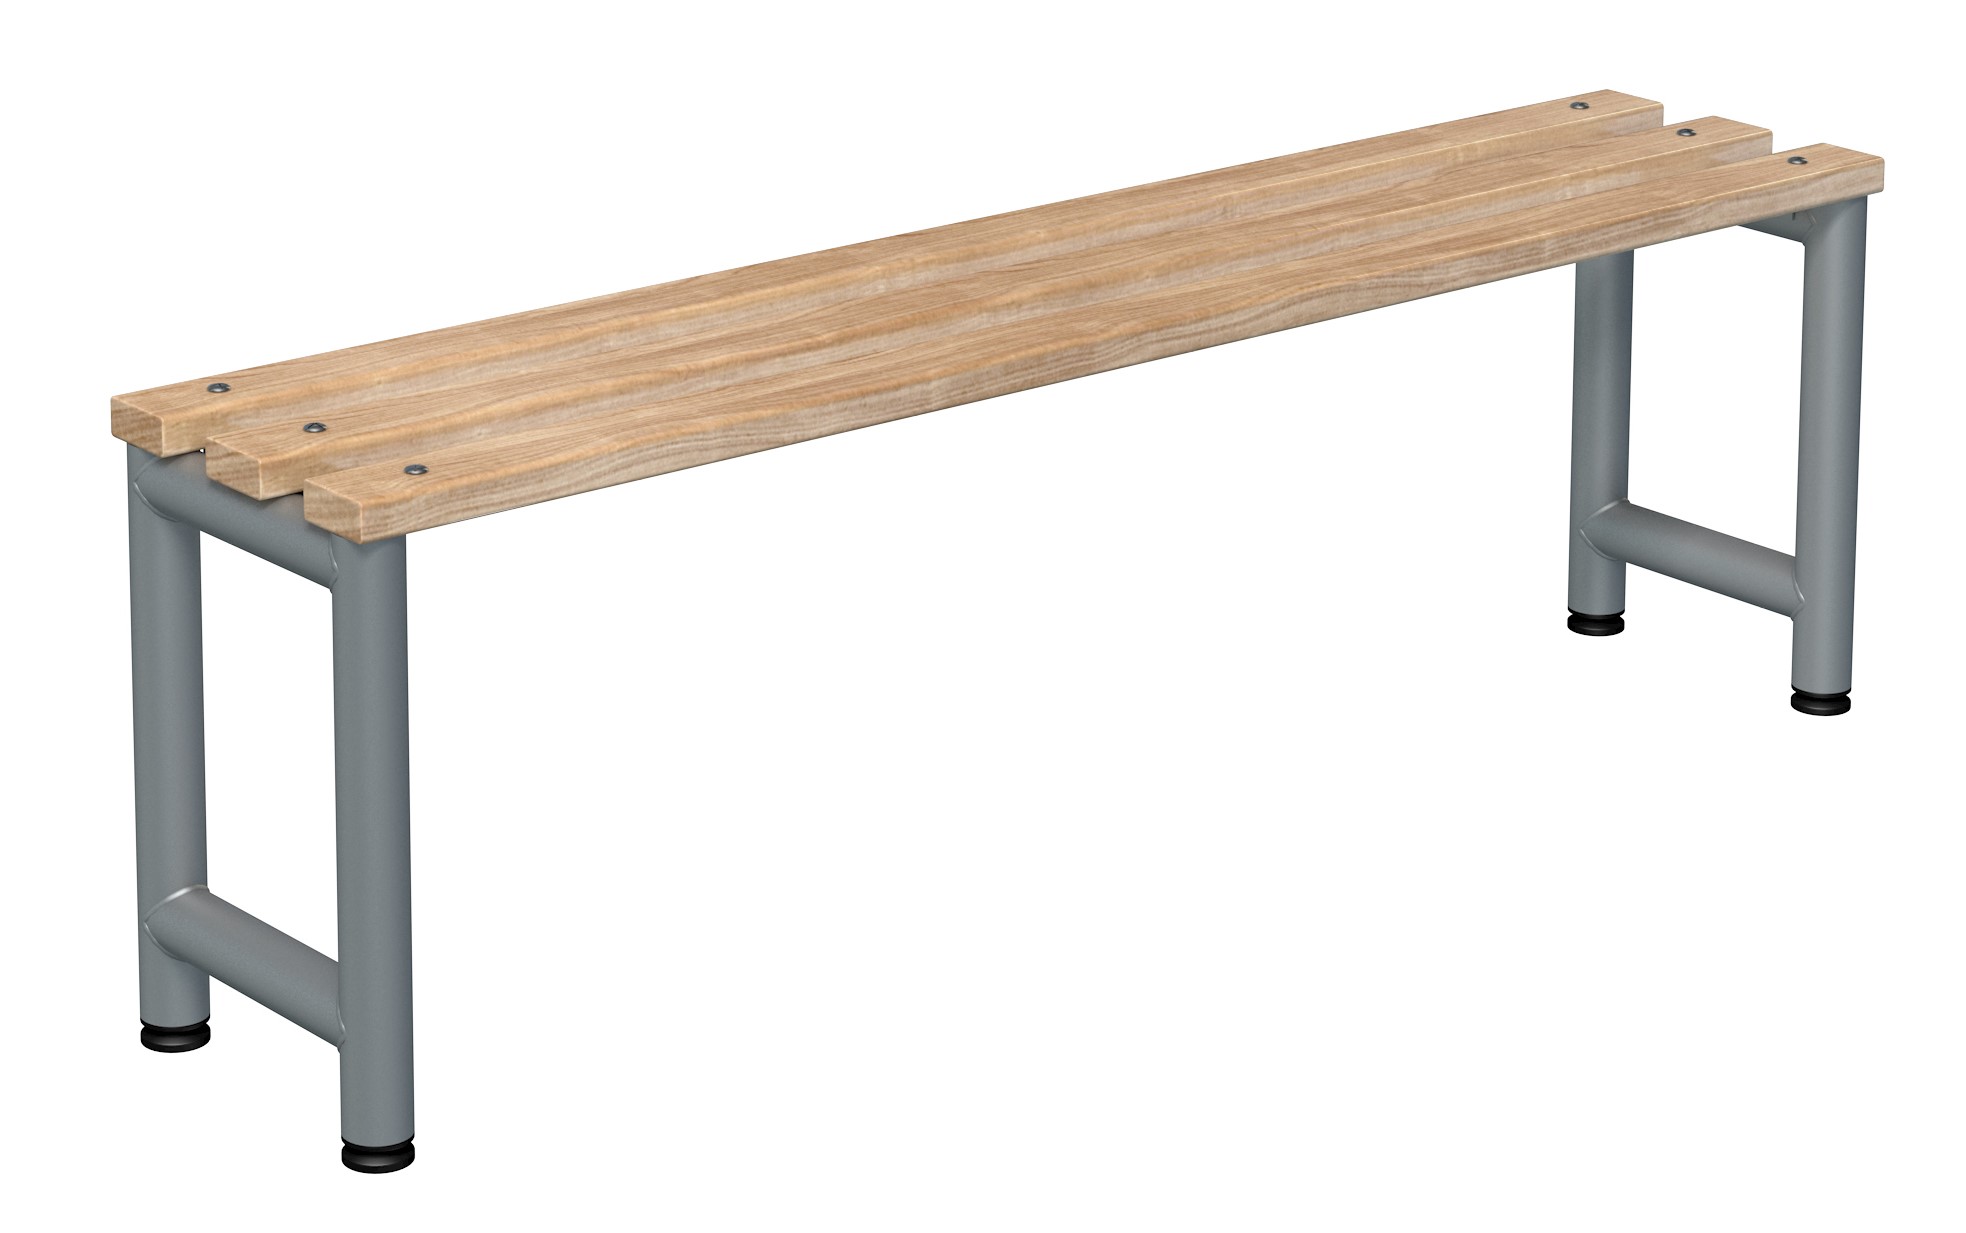 Single sided bench | POLYPAL STORAGE SYSTEMS